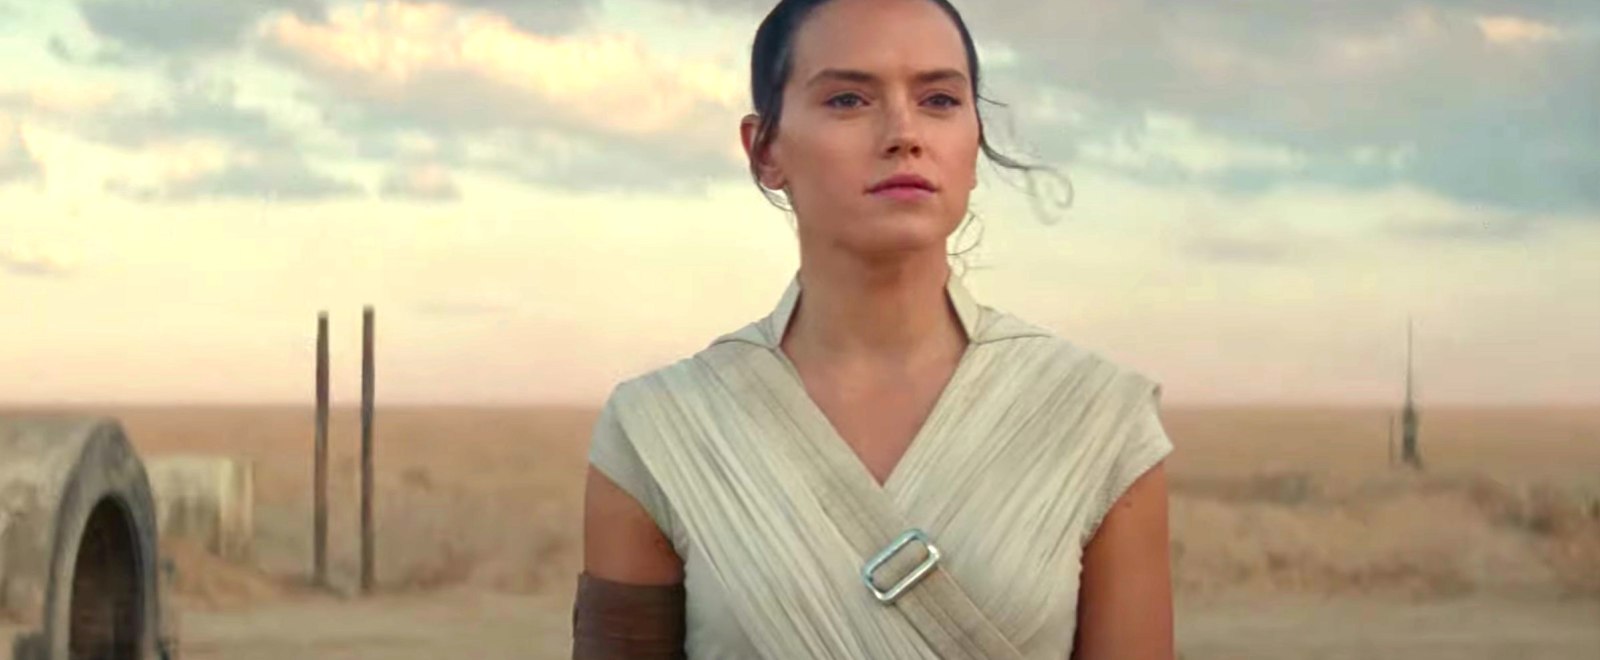 Star Wars 'Rise of Skywalker' embraces all the worst parts of